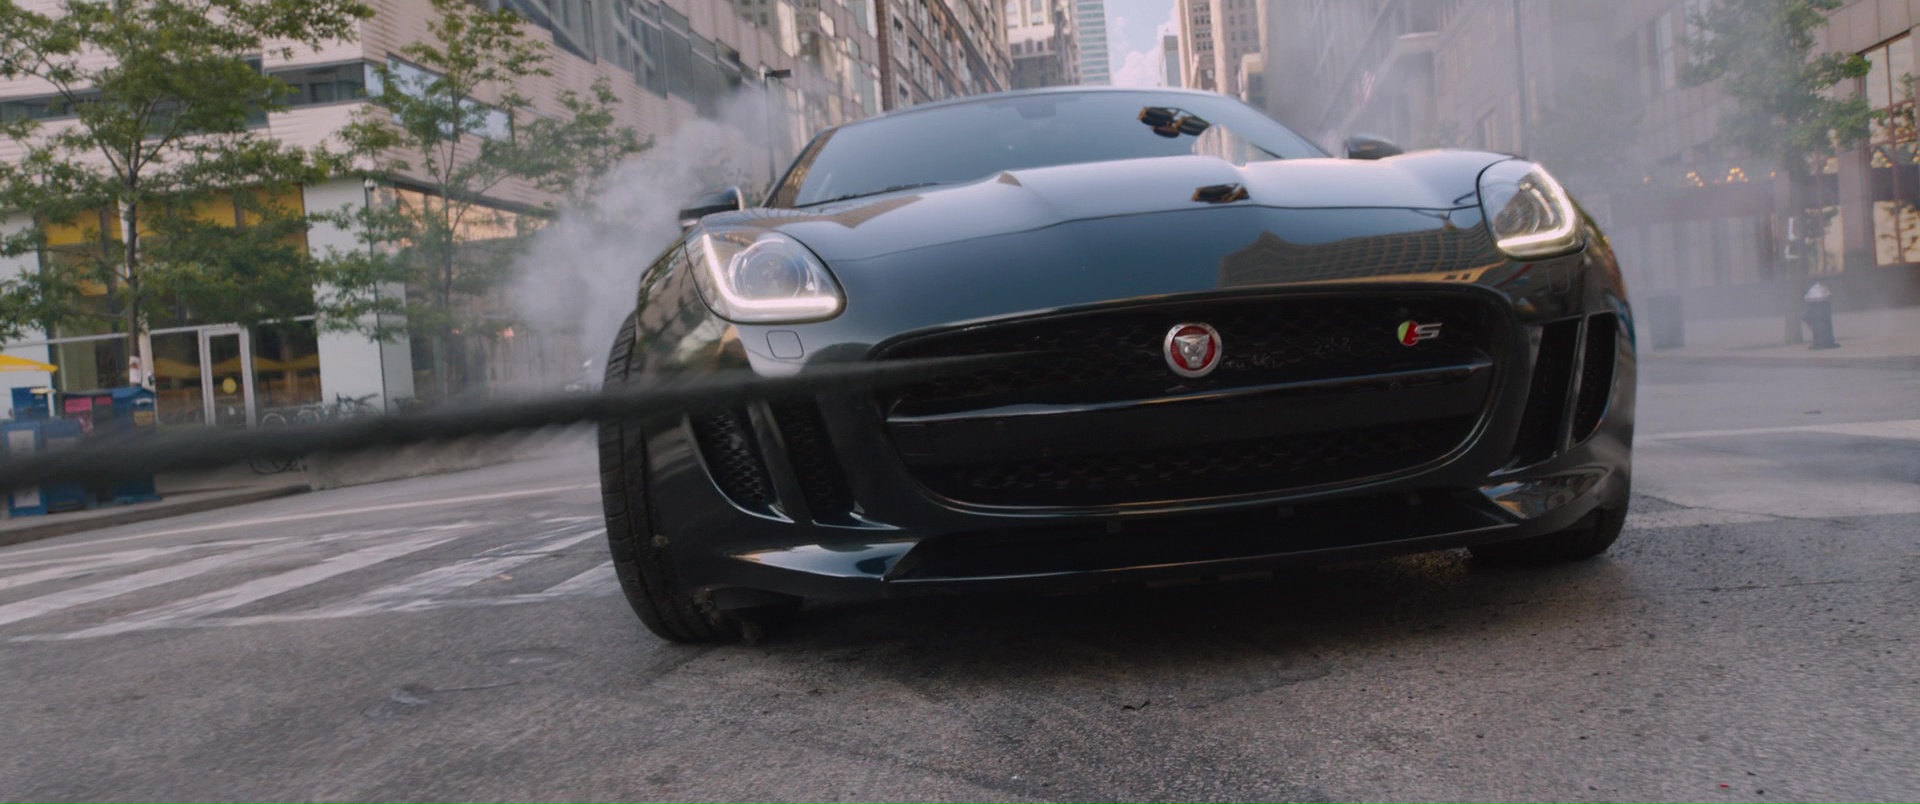 Jaguar F-Type Coupé Sports Car in The Fate of the Furious (2017) Movie1920 x 804